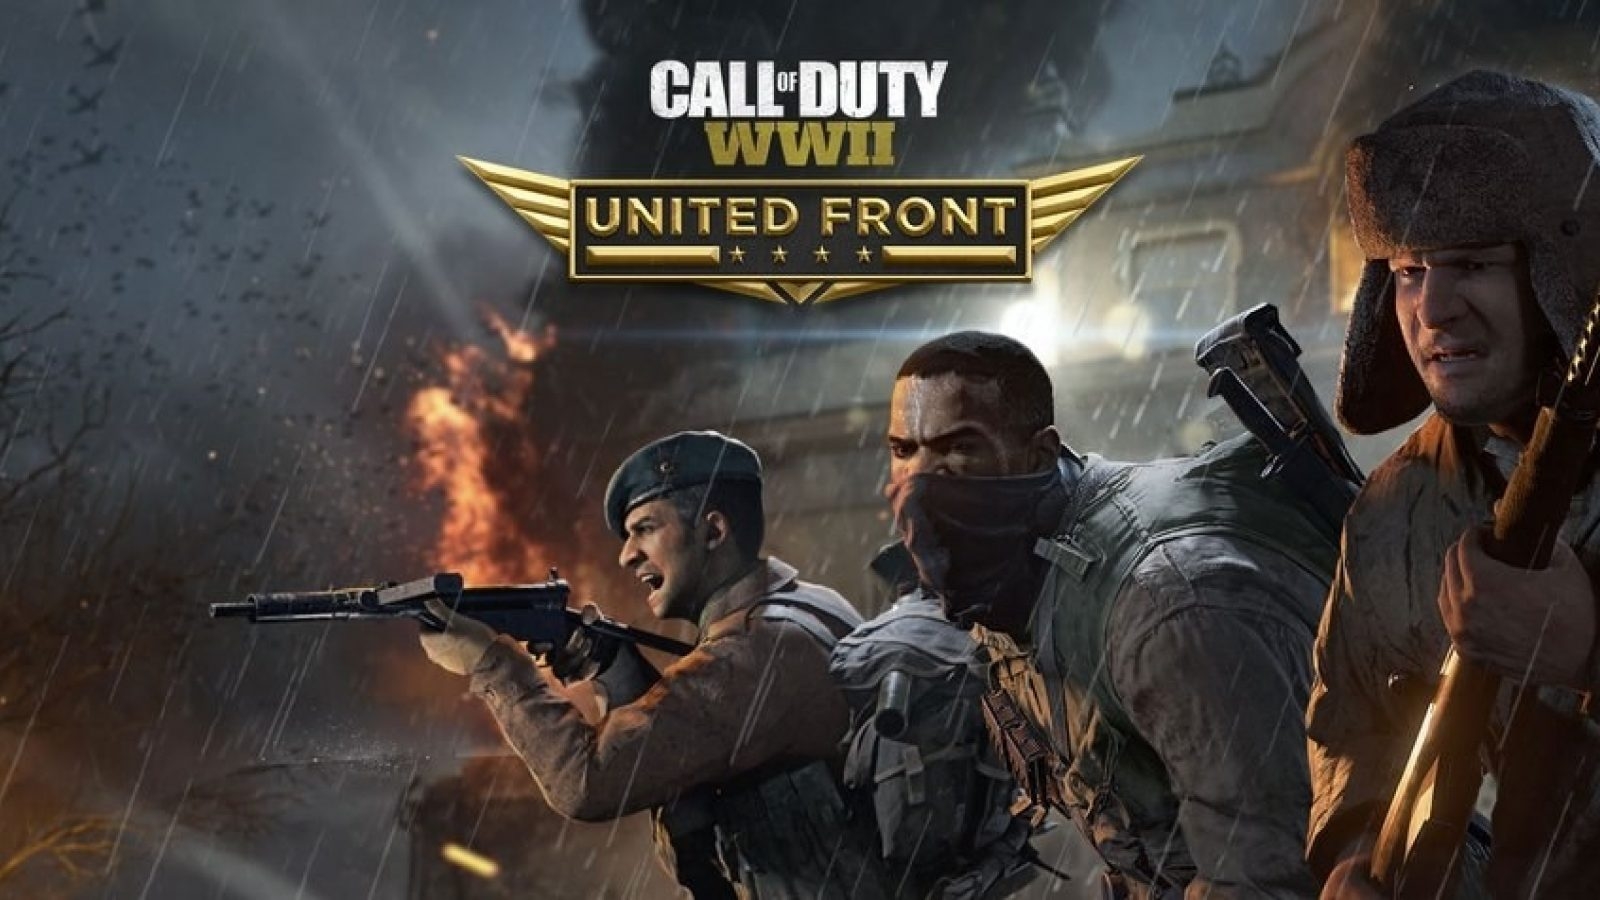 the latest call of duty game for ps4